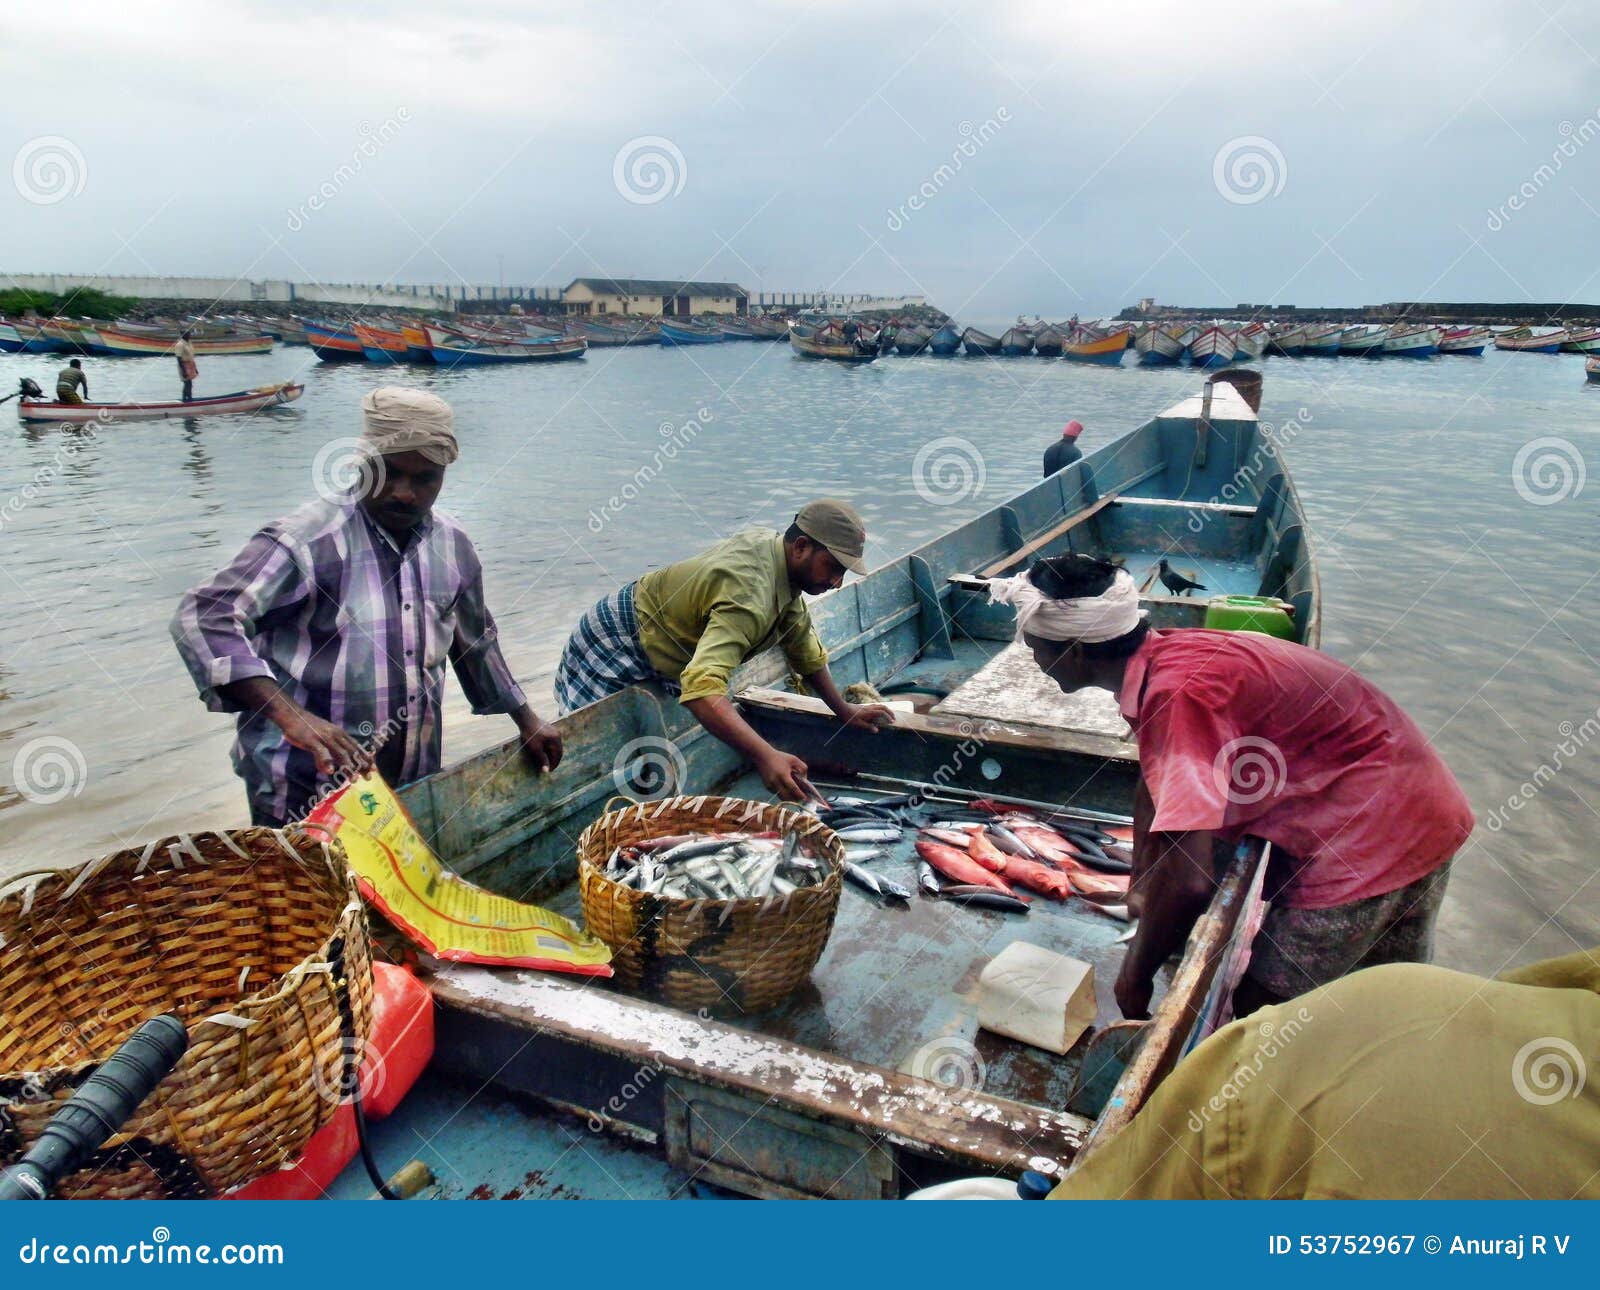 Fishing In India Editorial Photography - Image: 53752967